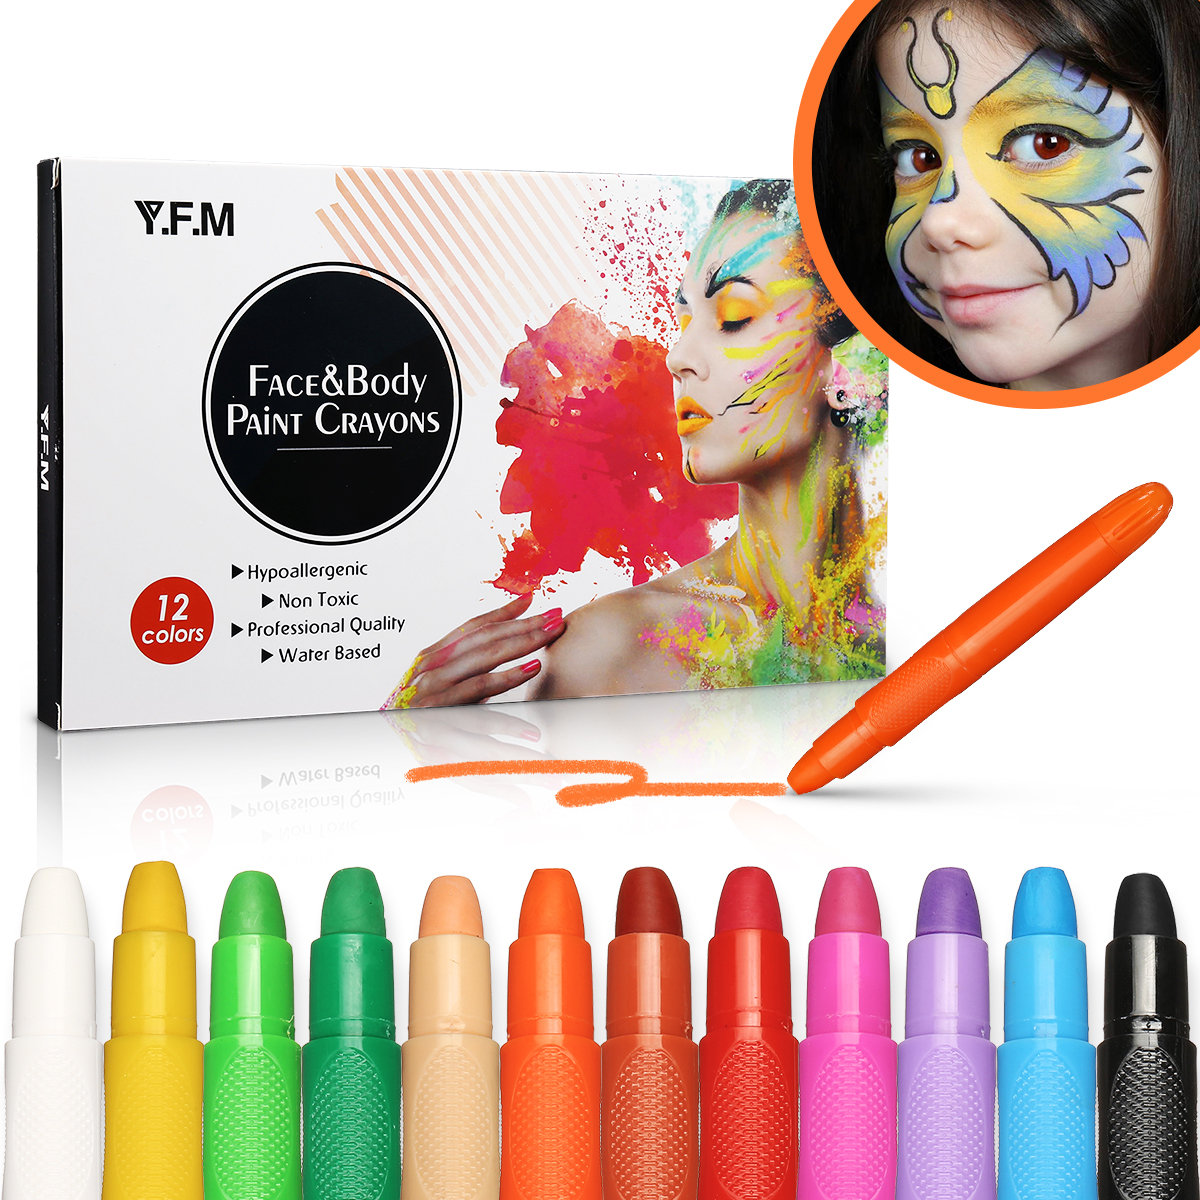 

Face Paint Crayon Body Painting Pen Safety Colorful Facial Painting Pen Temporary Body Art